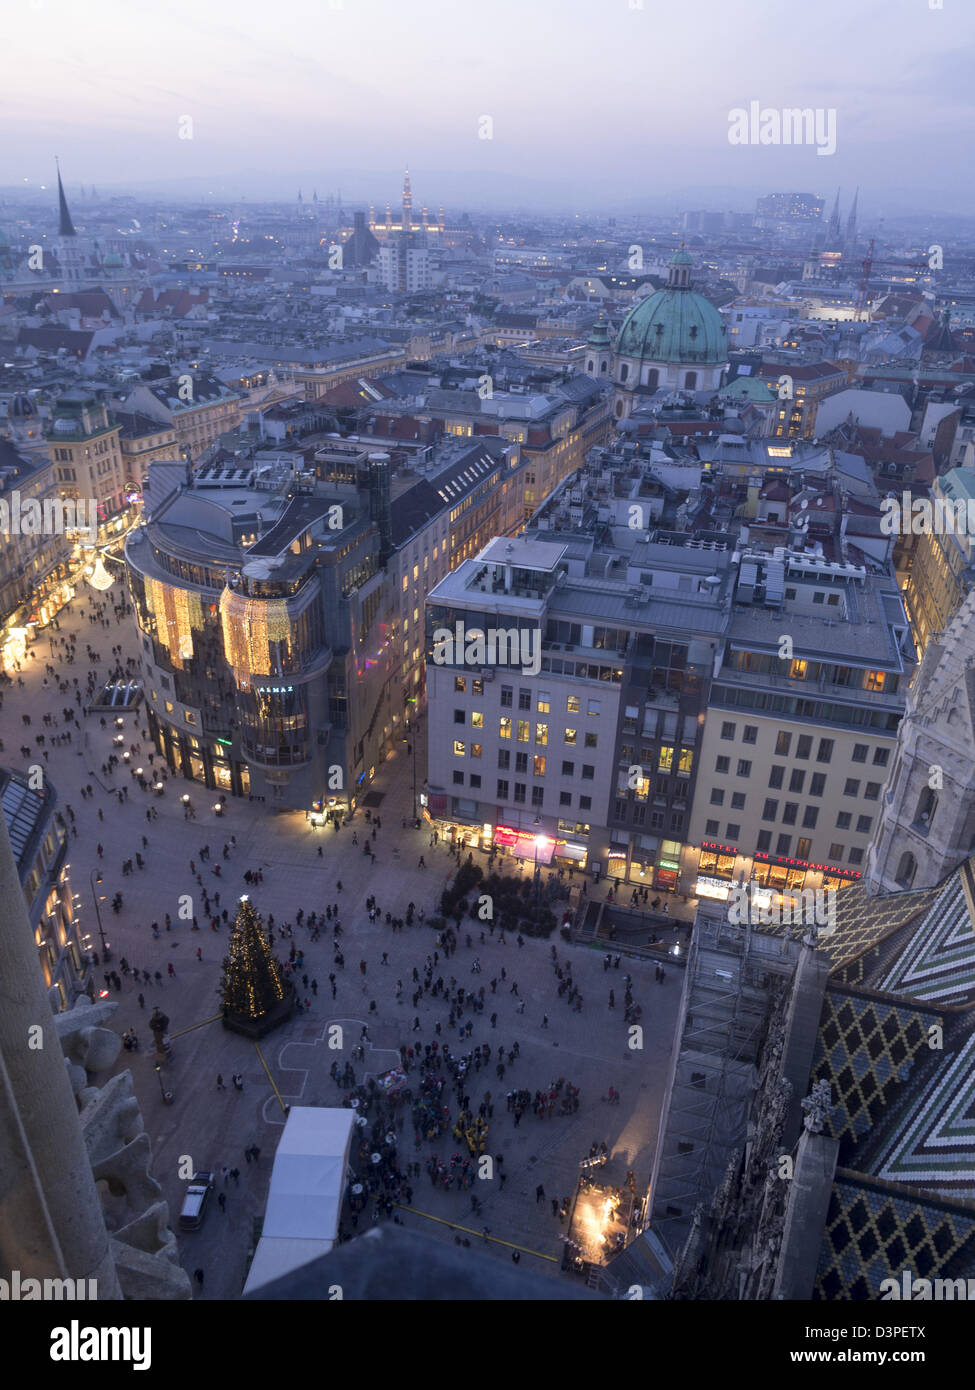 Vienna Cityscape: Stephansplatz and beyond. The view from the Stephandom steeple. The square, Rathaus and the palace. Stock Photo